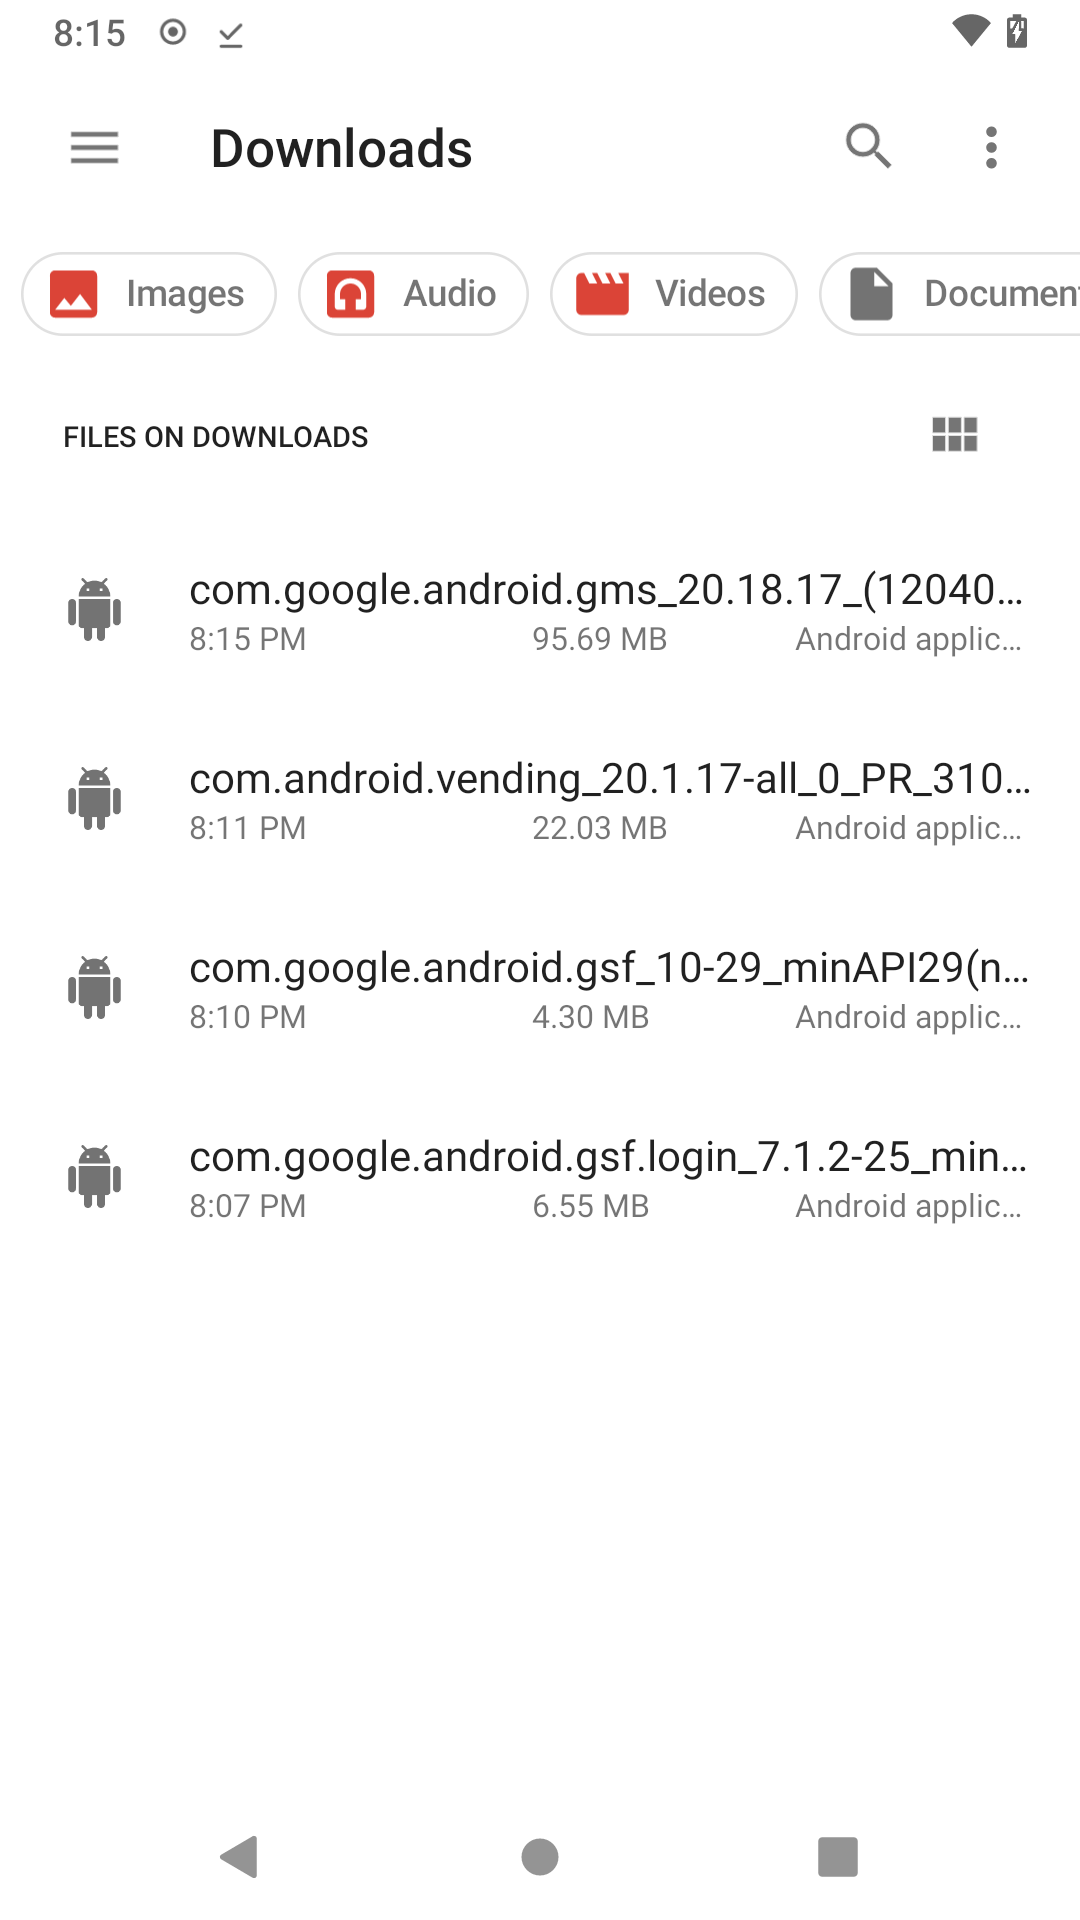 A list of APK downloads shown in a file manager on Android